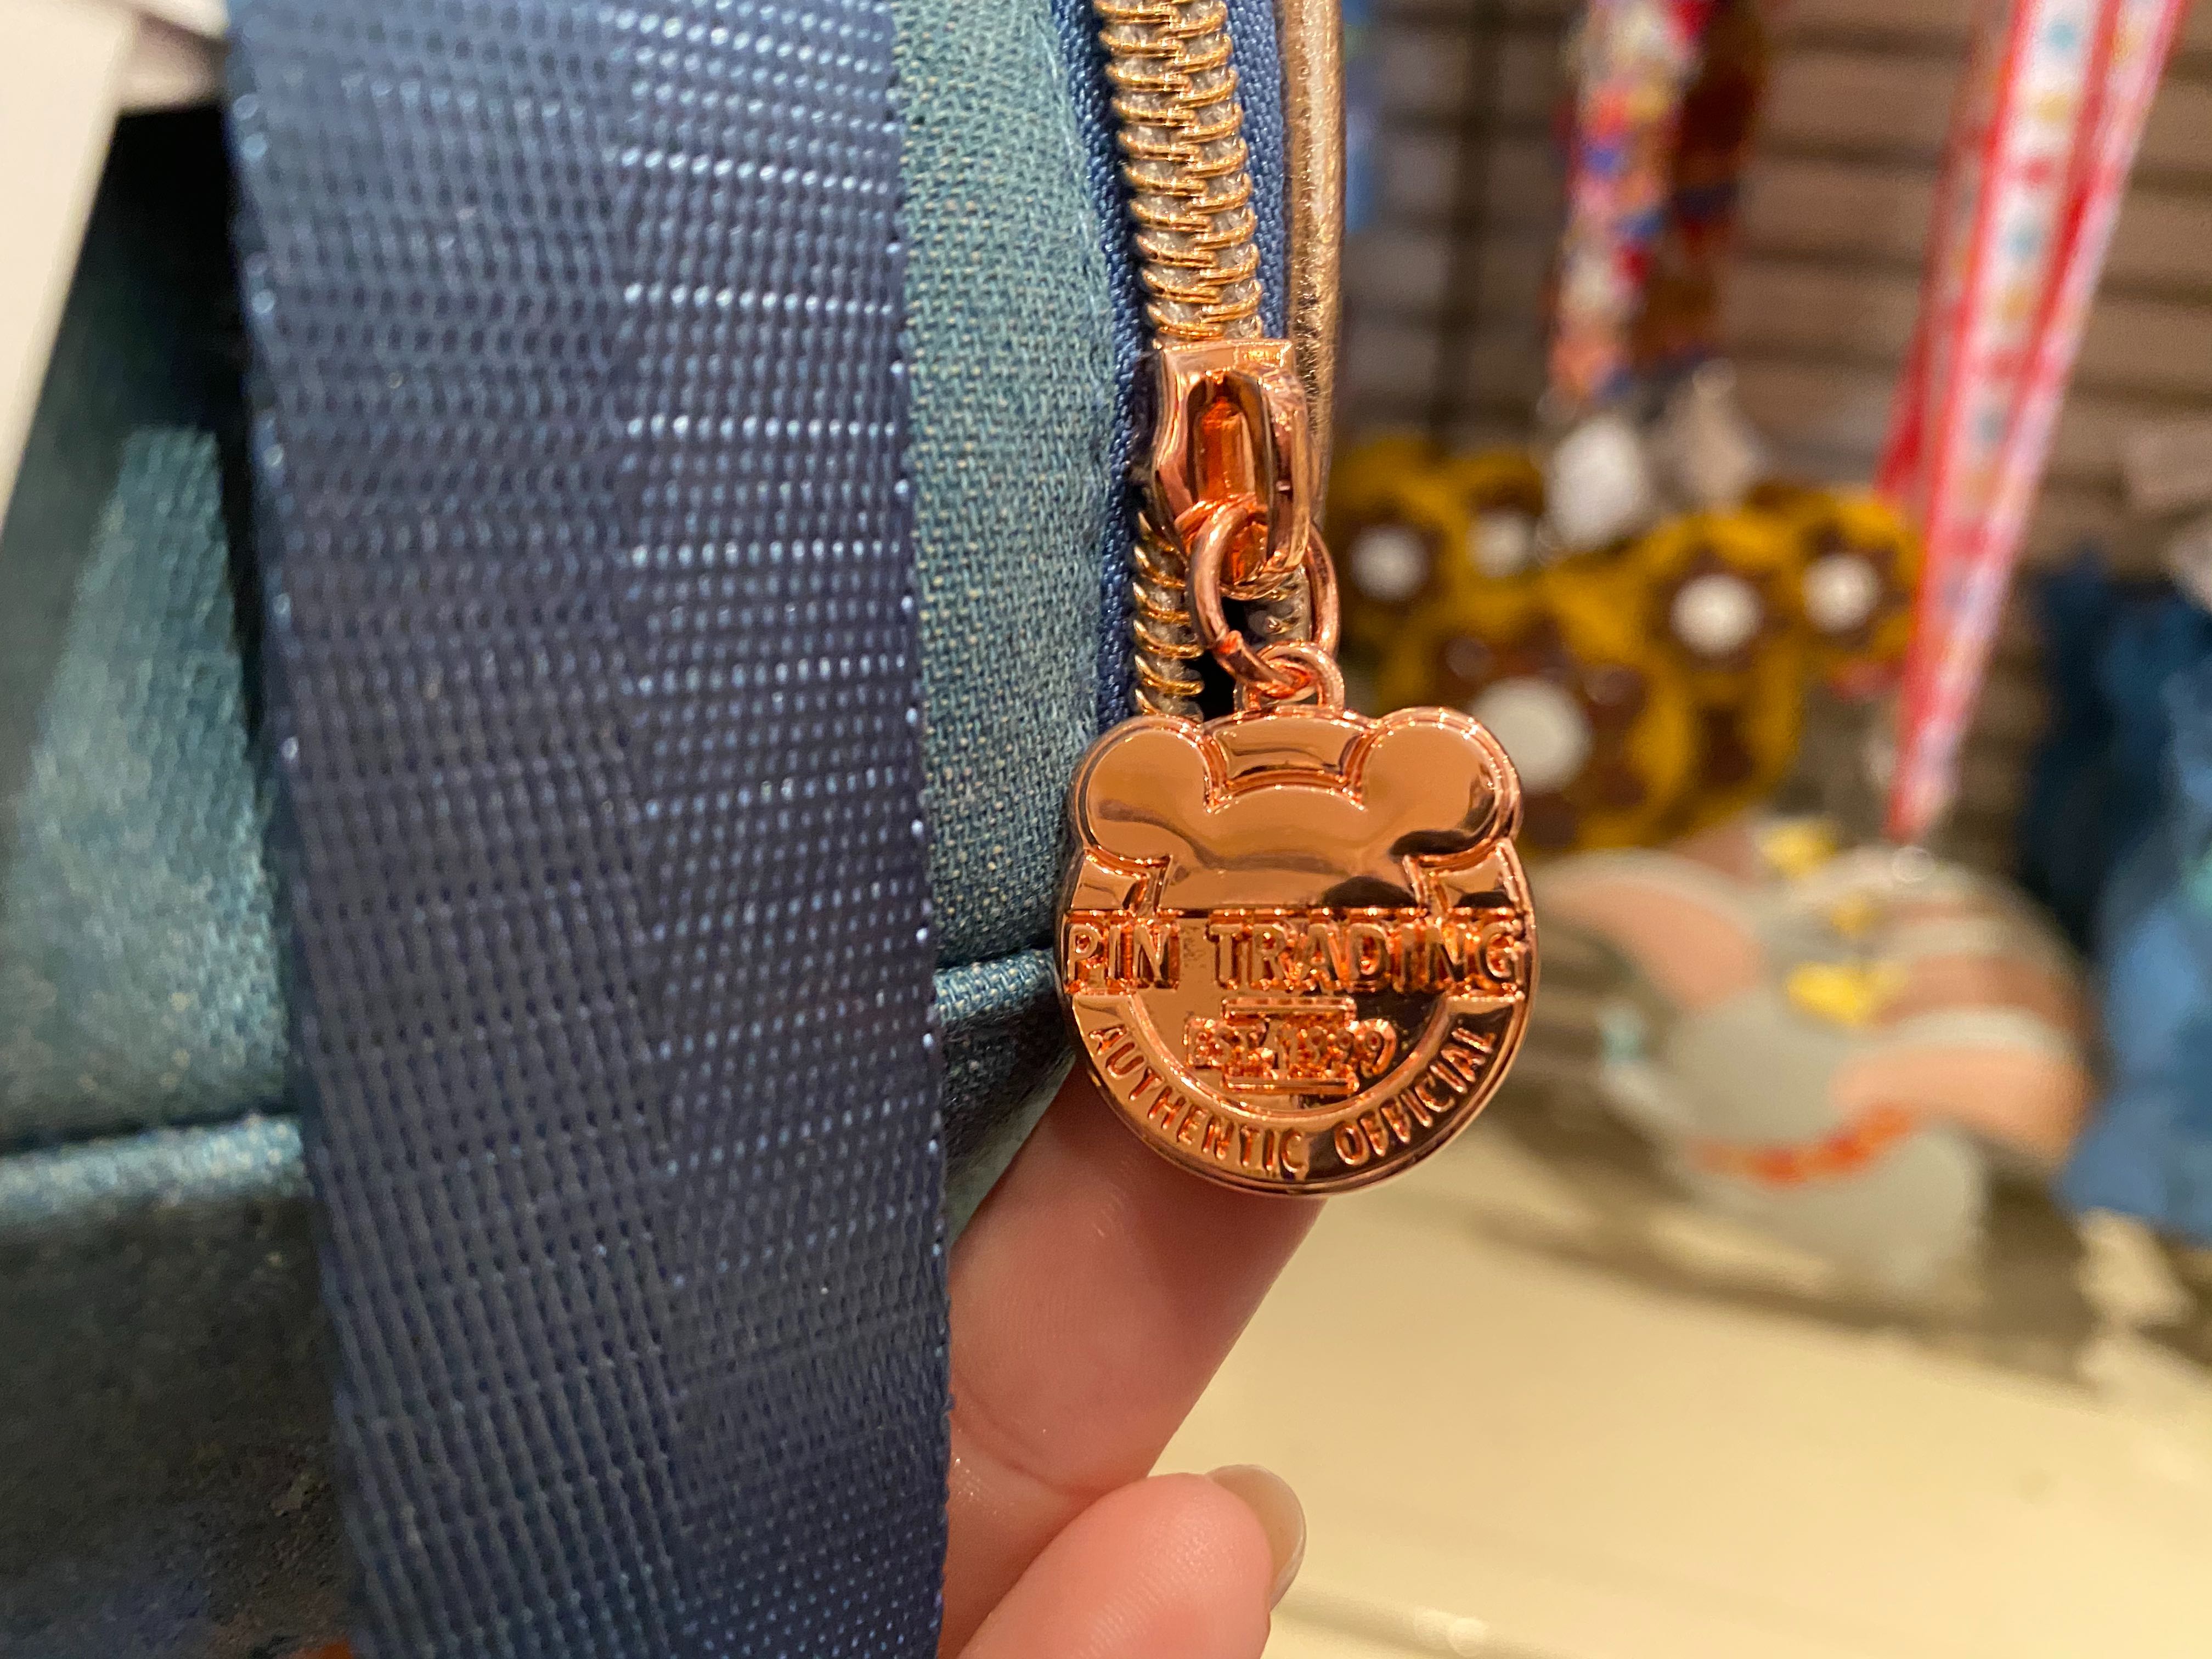 PHOTOS: New Disney Pin Trading Bags for Every Style Arrive at ...